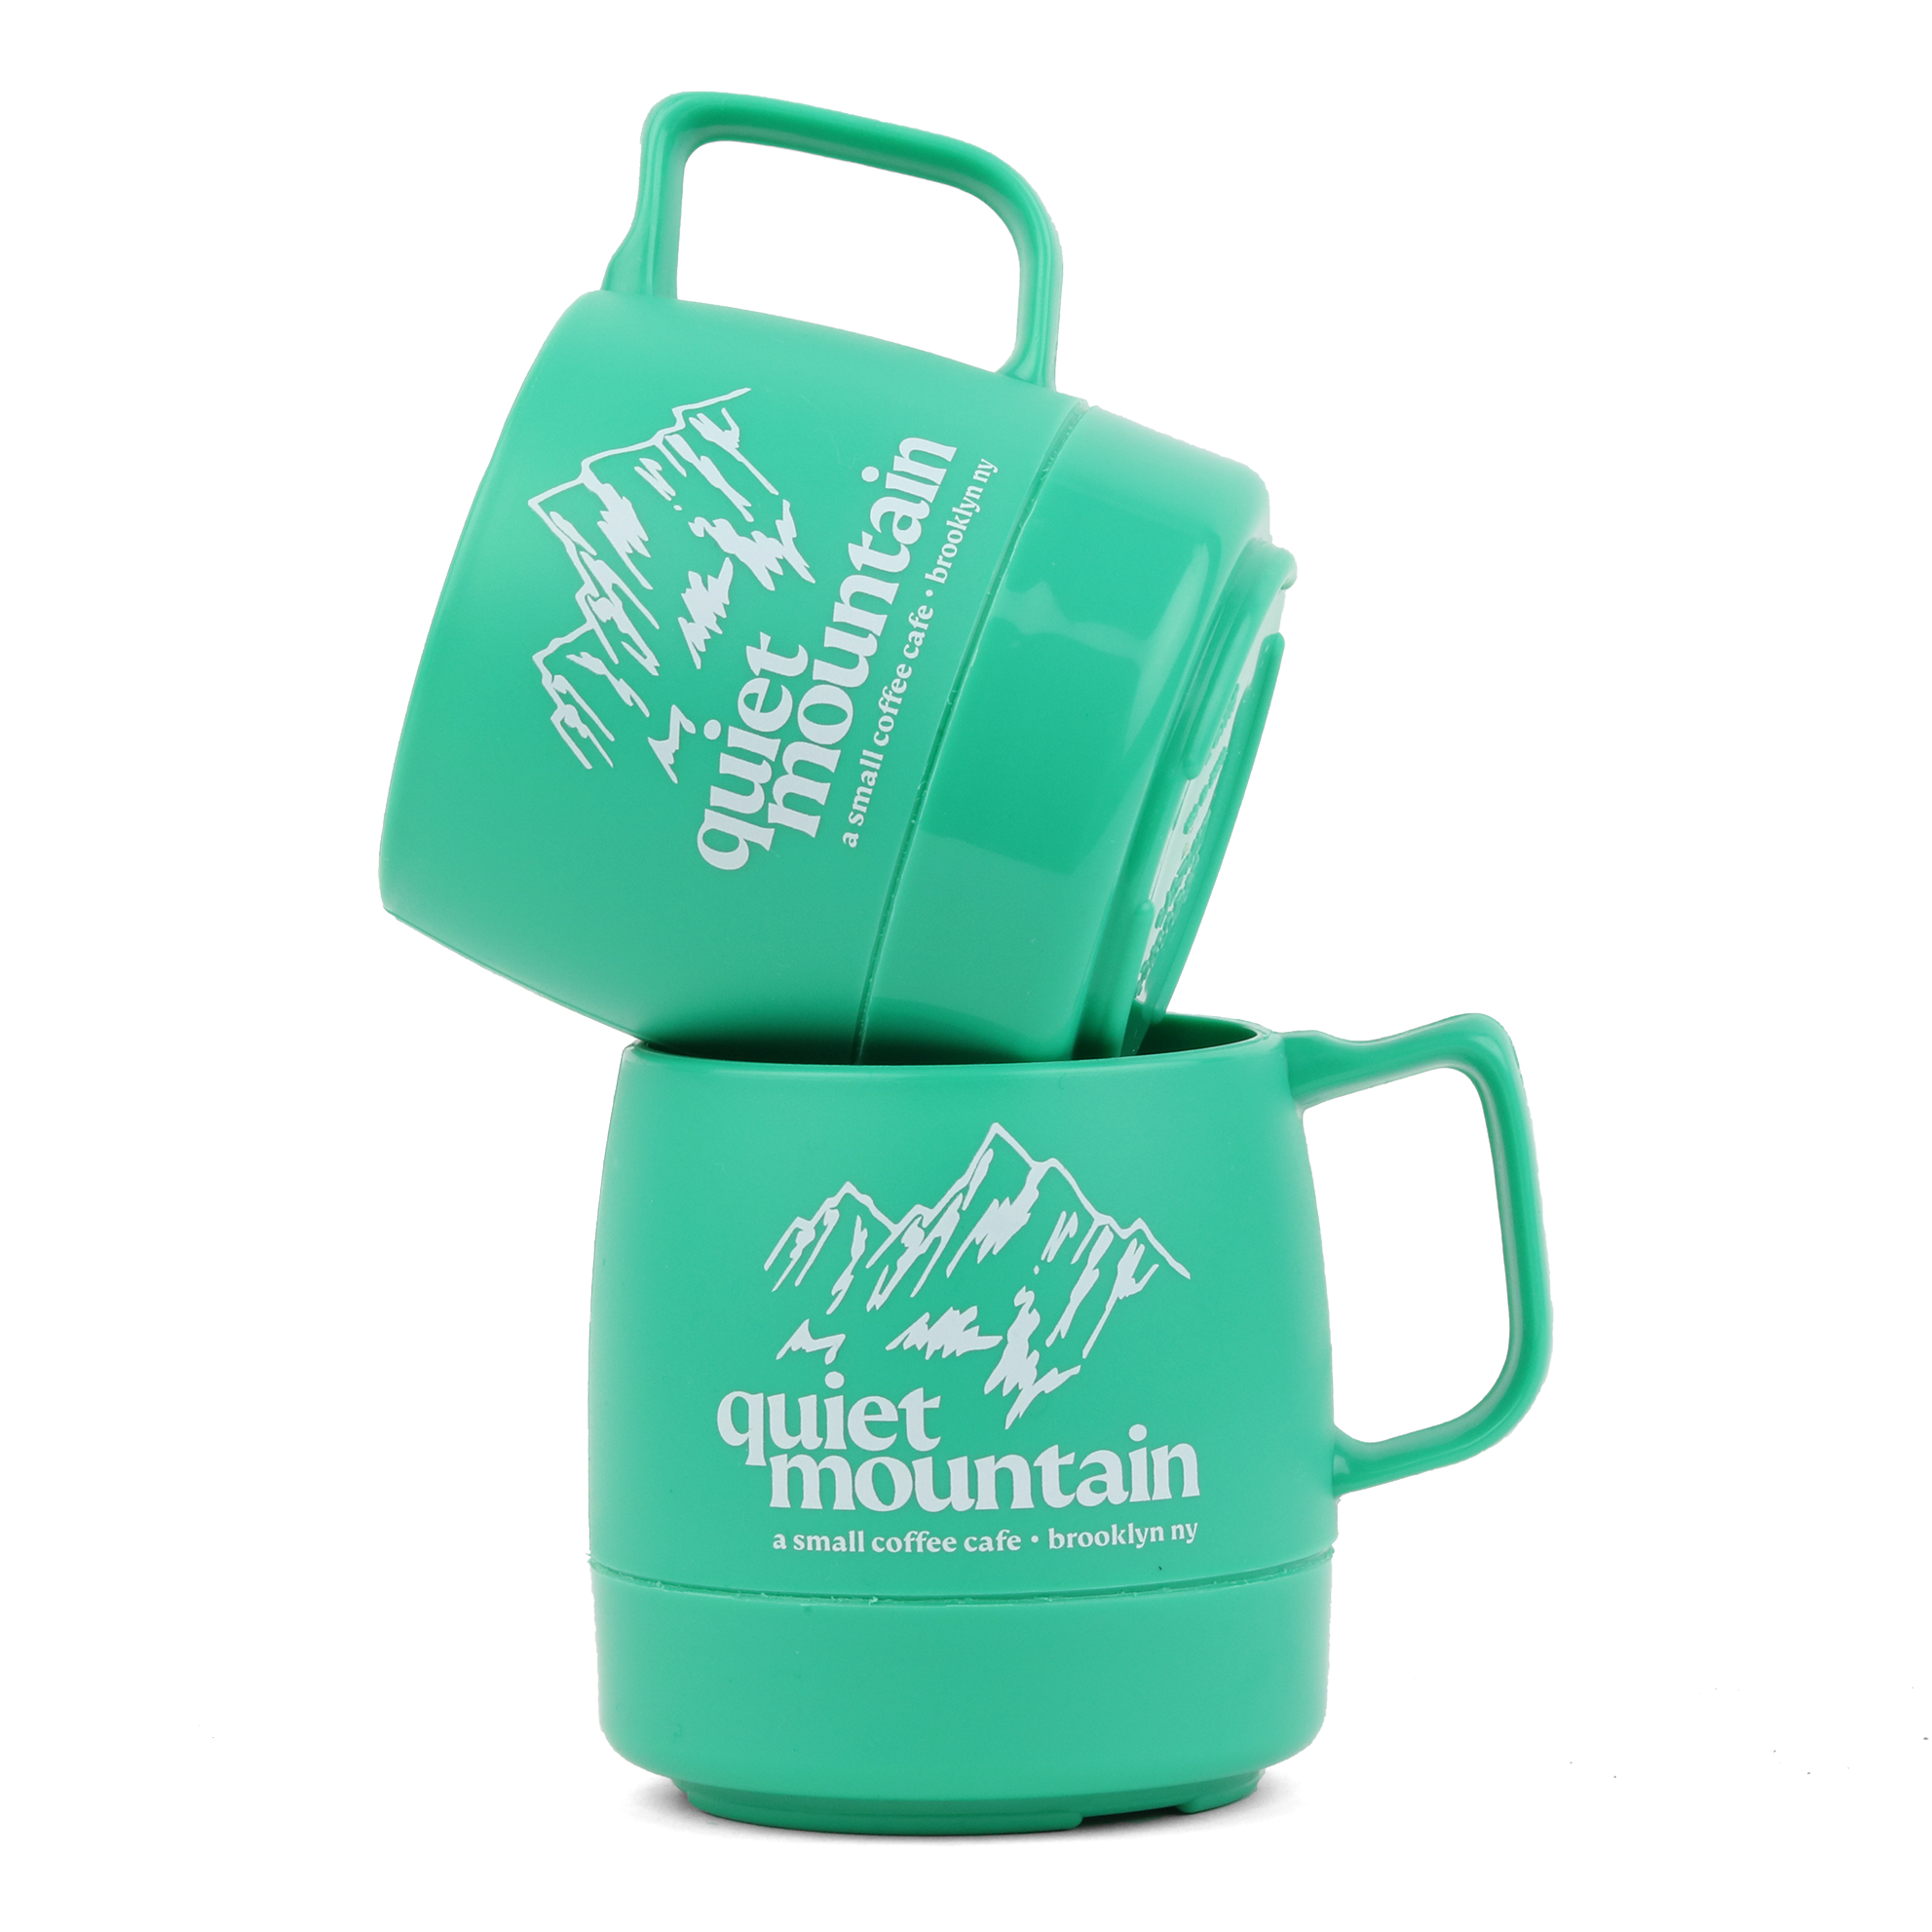 right side product mug - quiet mountain cafe